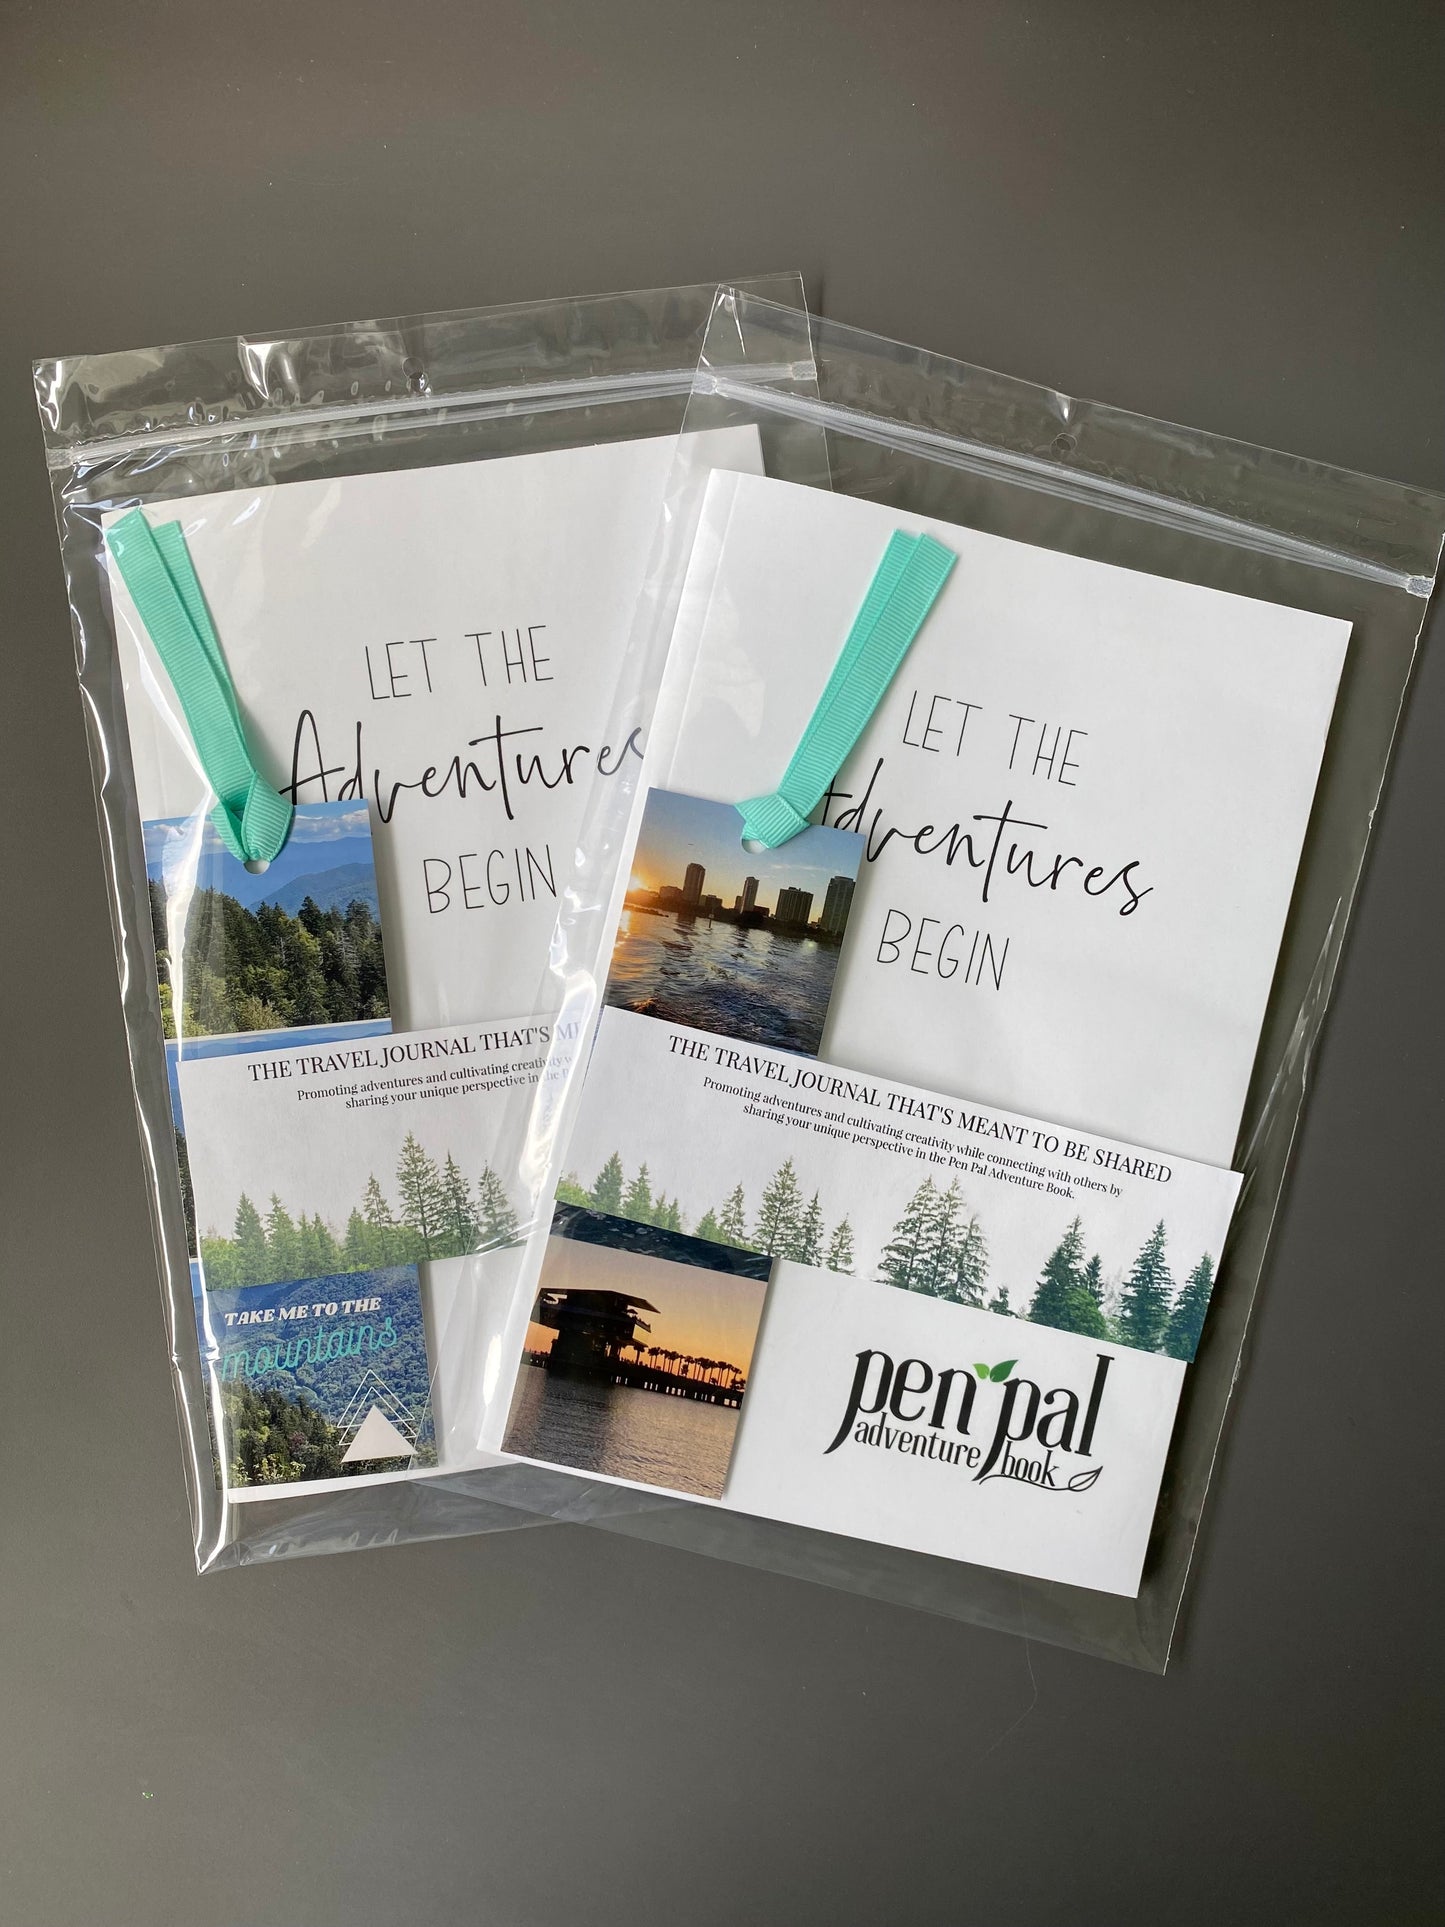 WHOLESALE-Pen Pal Adventure Book with Smoky Mountains Tennessee Sticker Set of 5 Kits